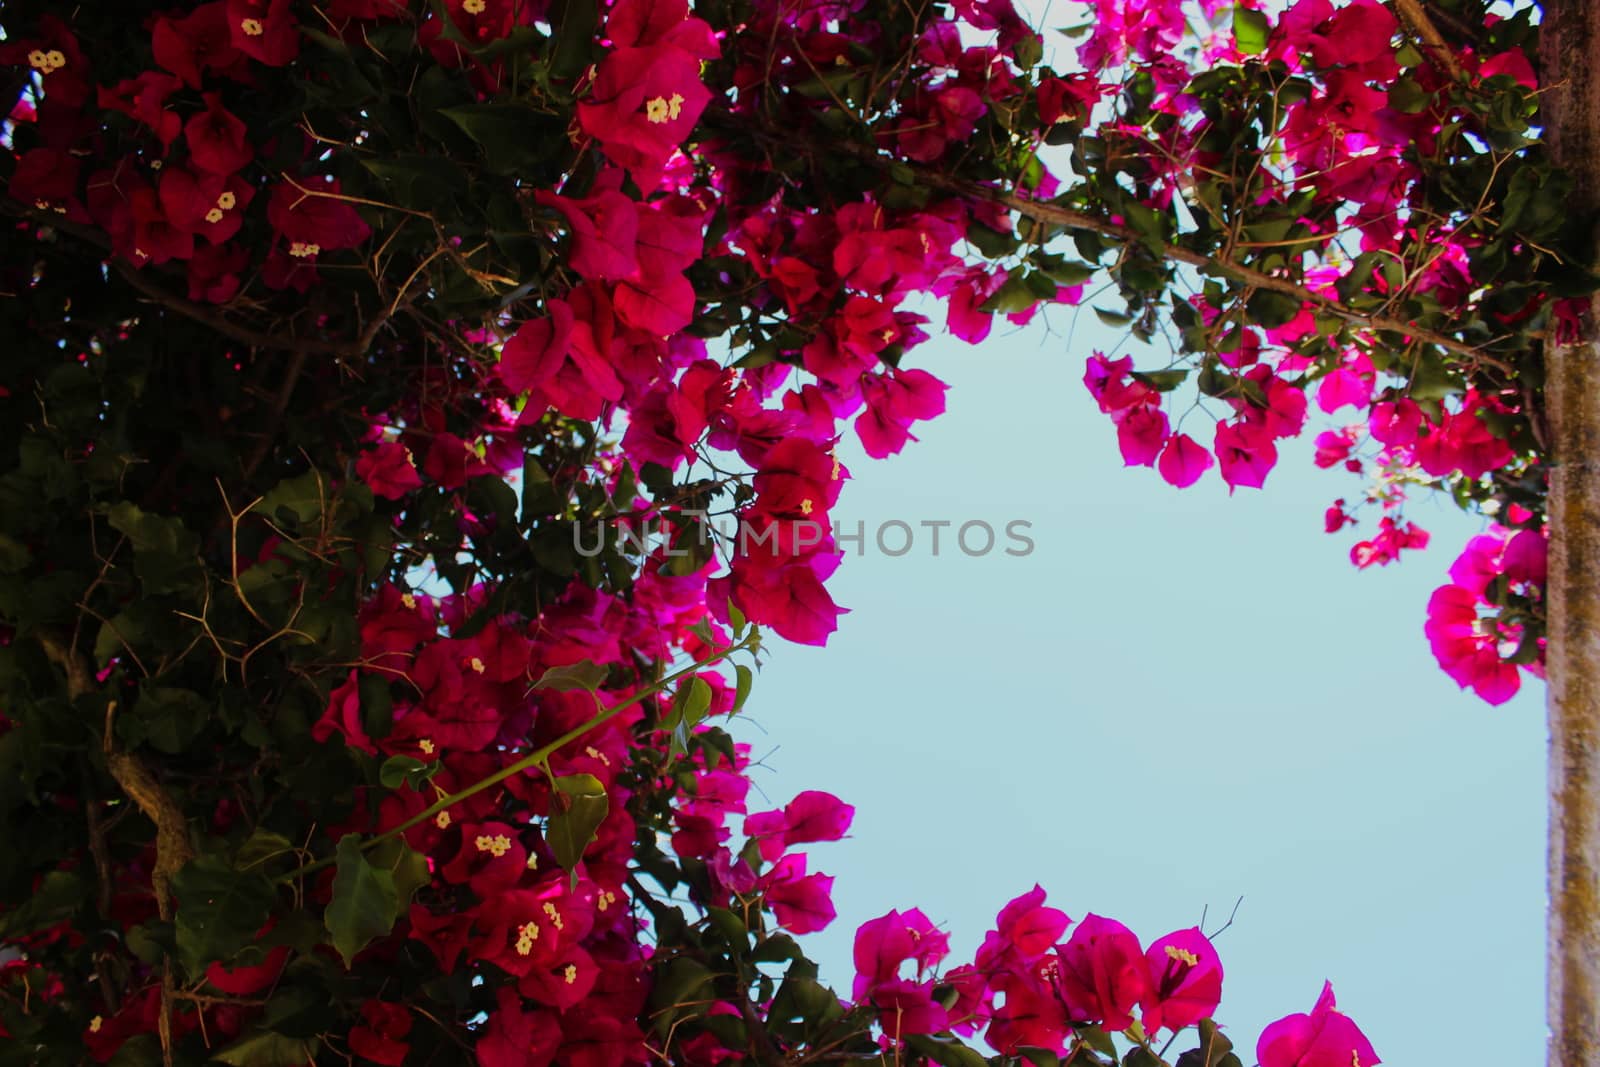 Great bougainvillea flowers with sky in the background. Beja, Portugal.